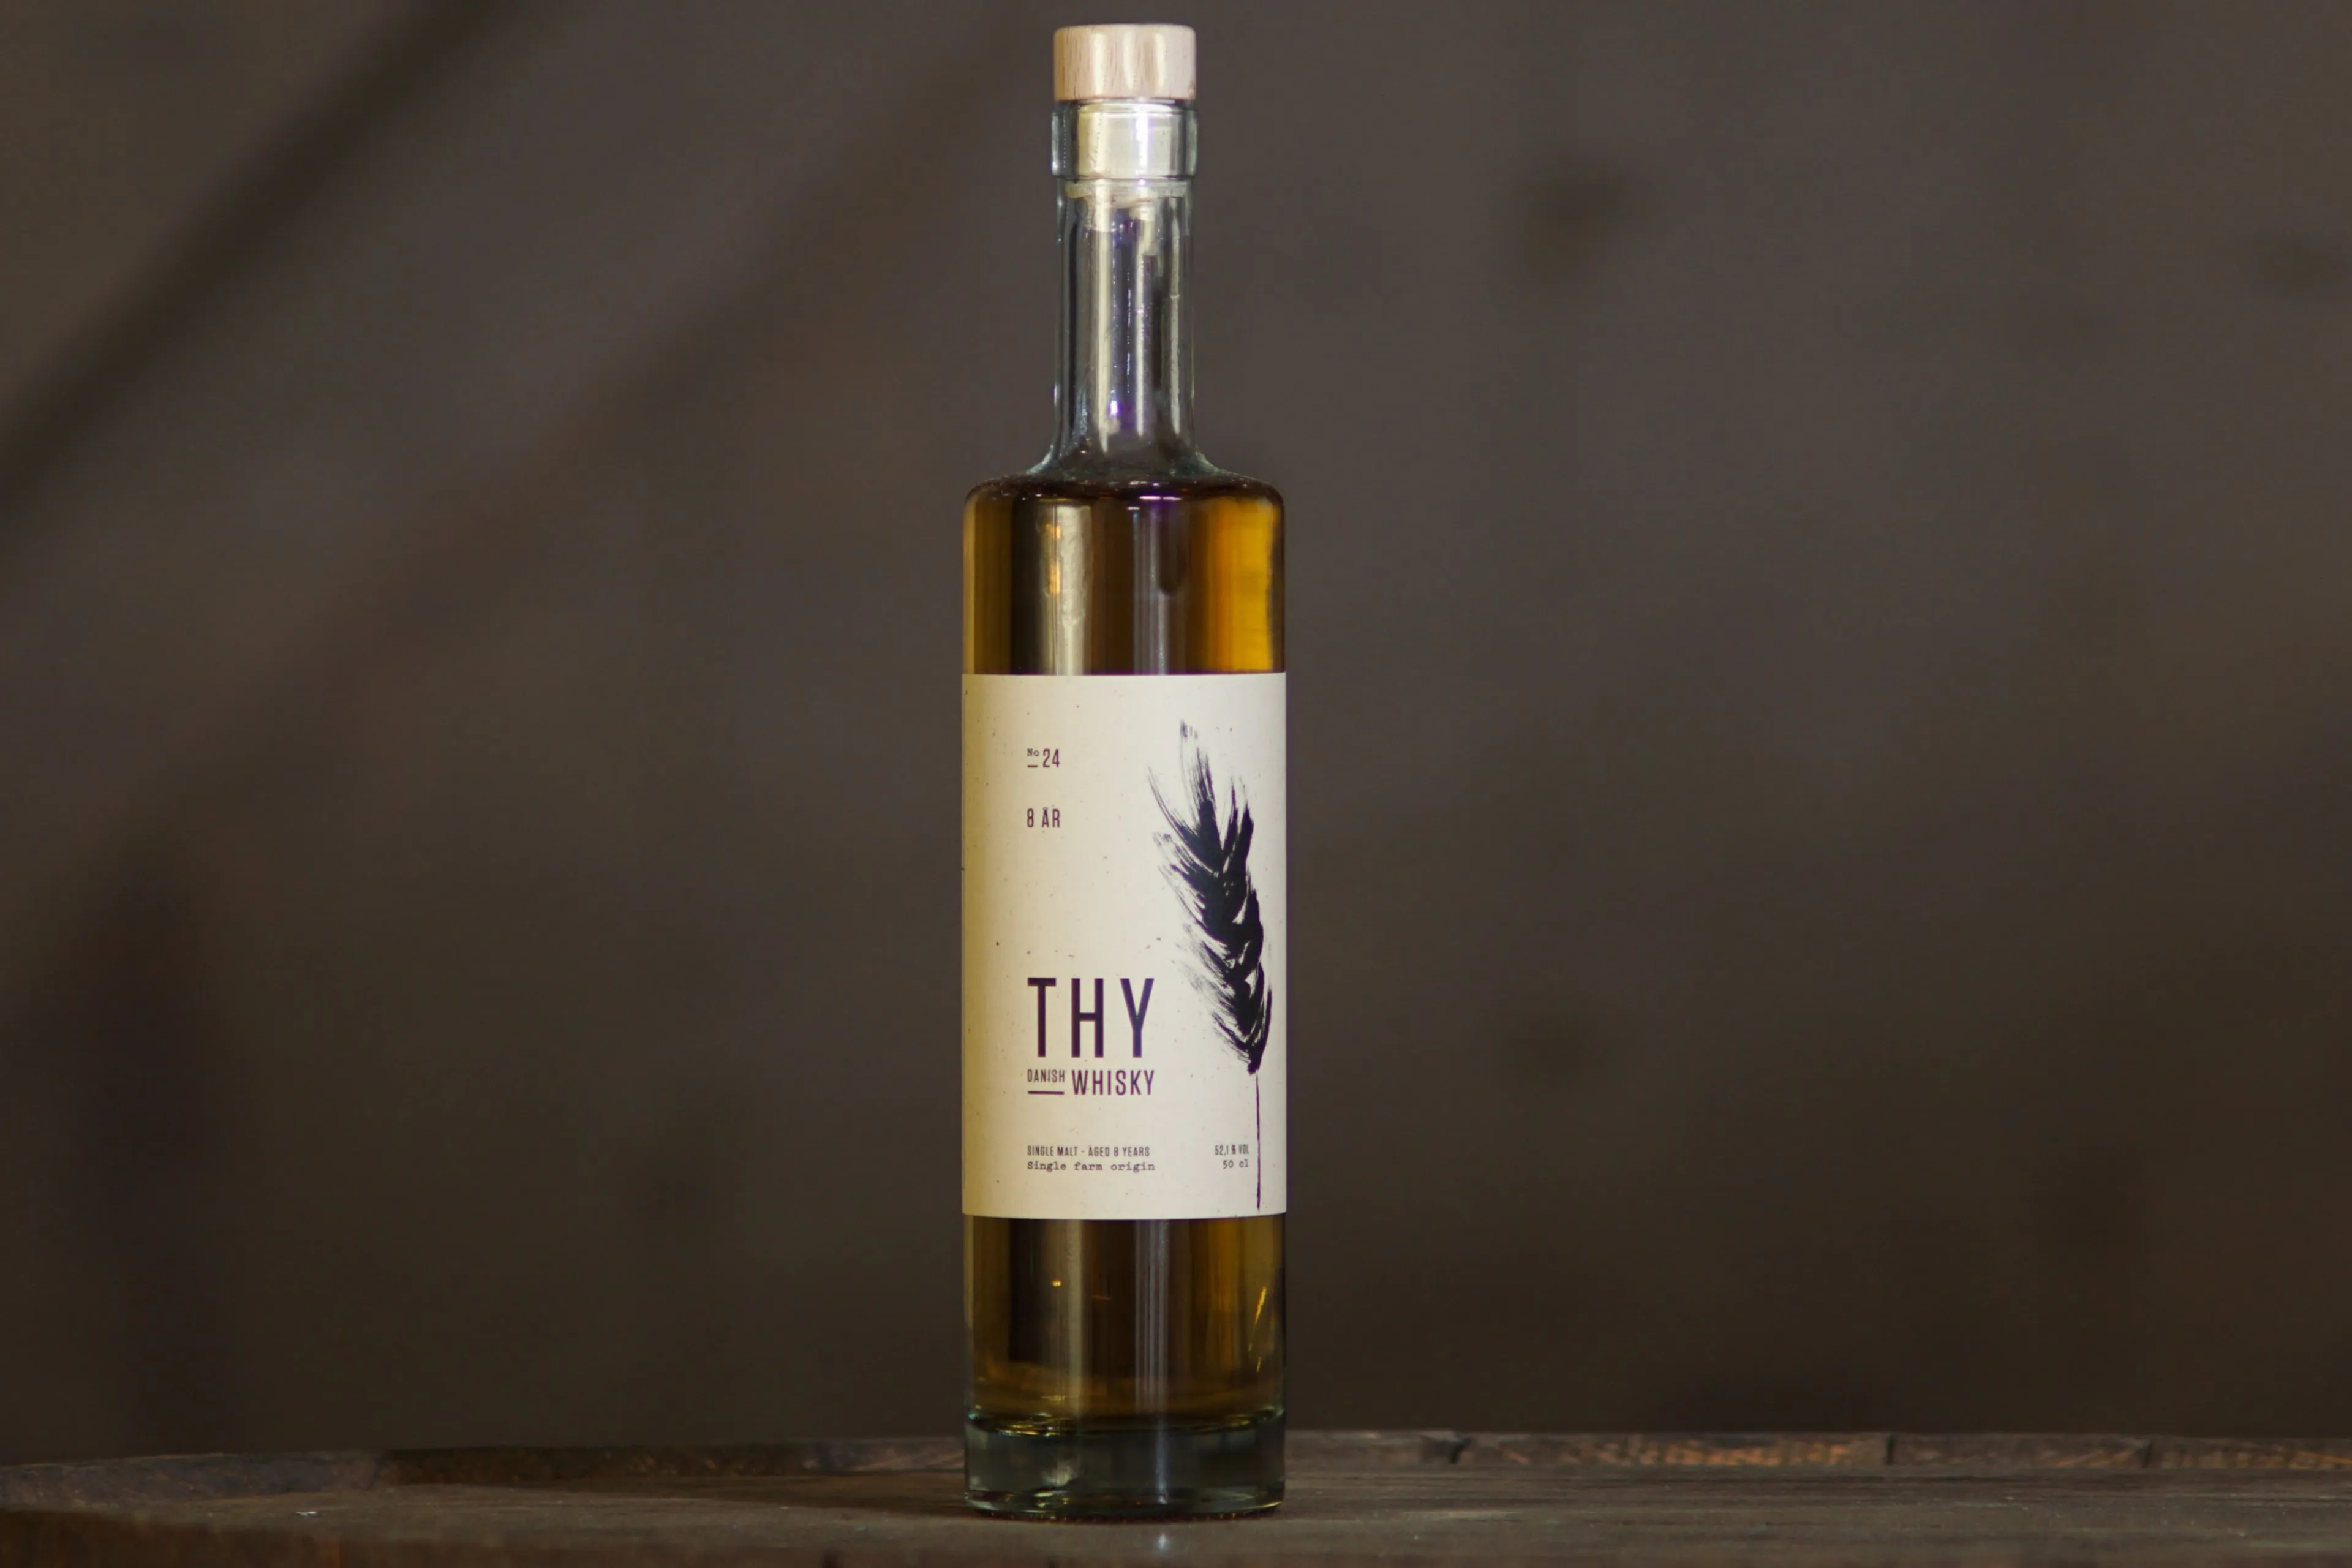 thy 24 8 years old whisky